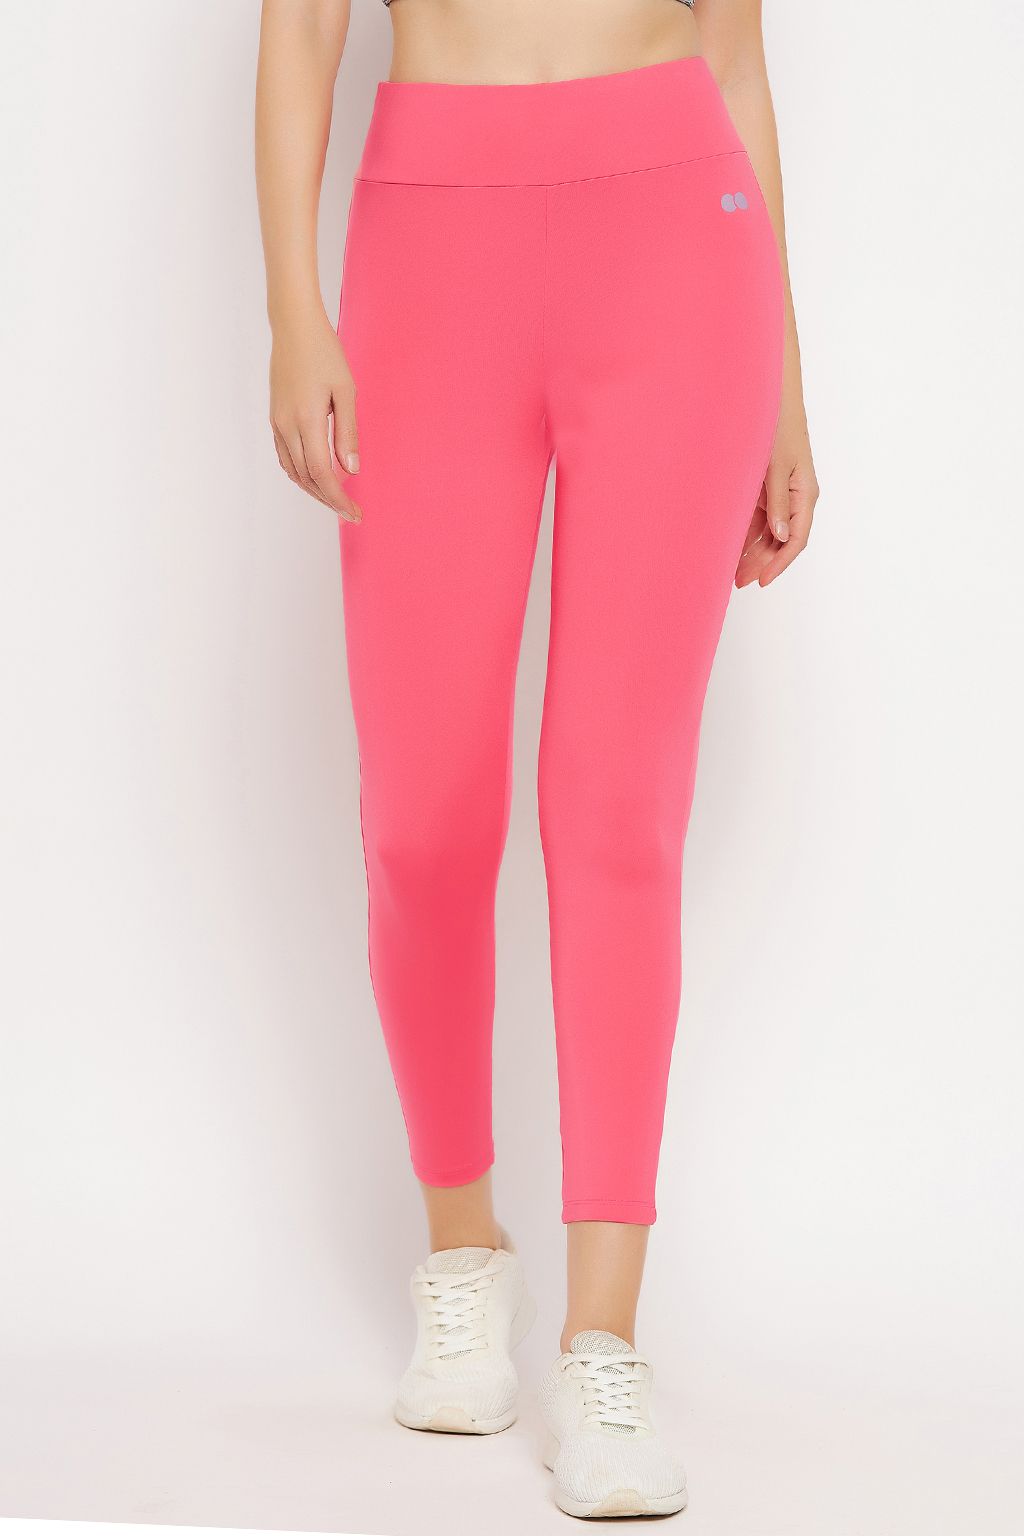     			Clovia Pink Polyester Solid Tights - Single